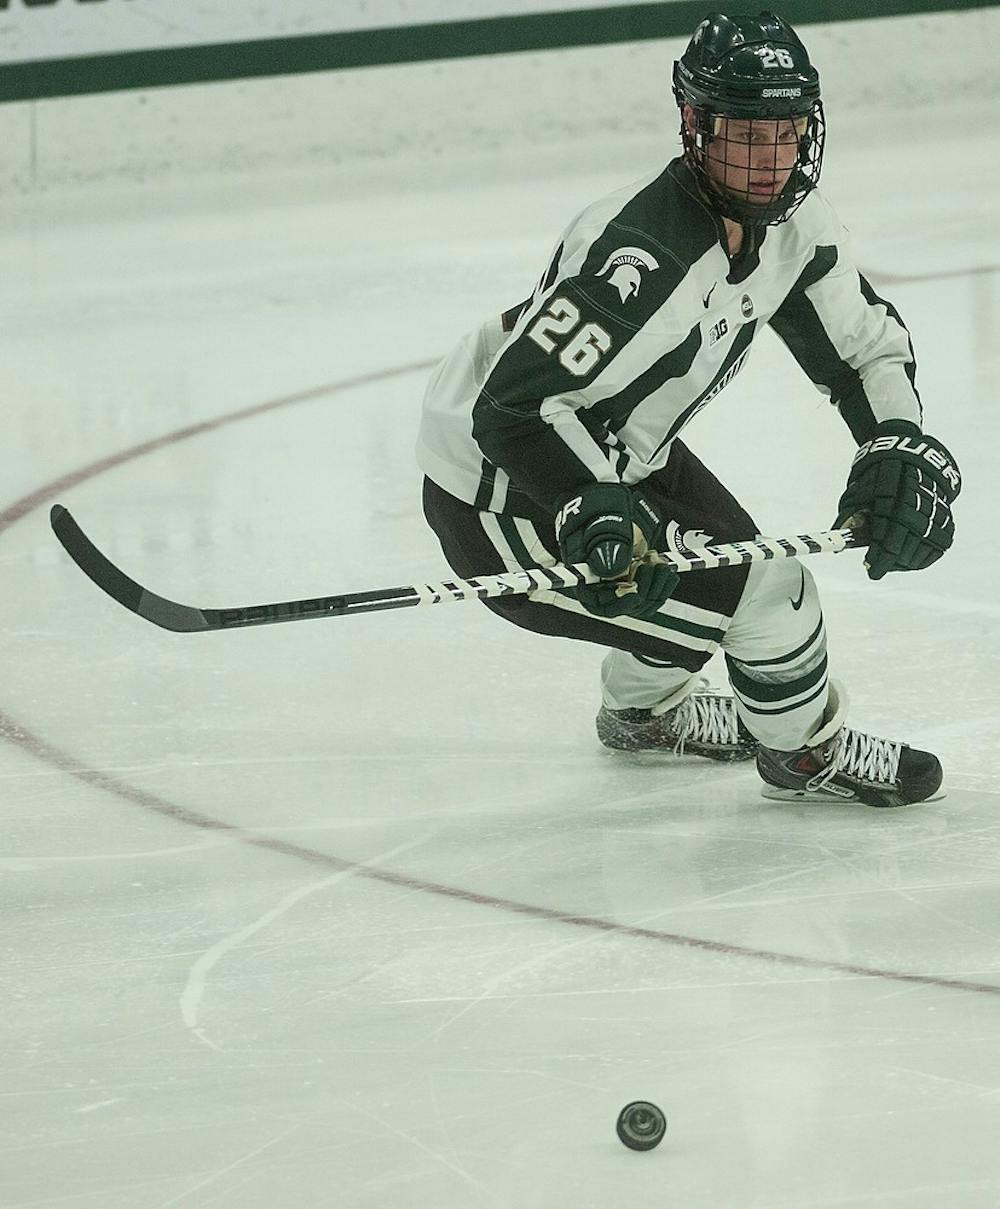 <p>Sophomore forward Villiam Haag takes the puck down the ice Jan. 23, 2015, during a game against Ohio State  at Munn Ice Arena. The Spartans defeated the Buckeyes, 4-1. Alice Kole/The State News</p>